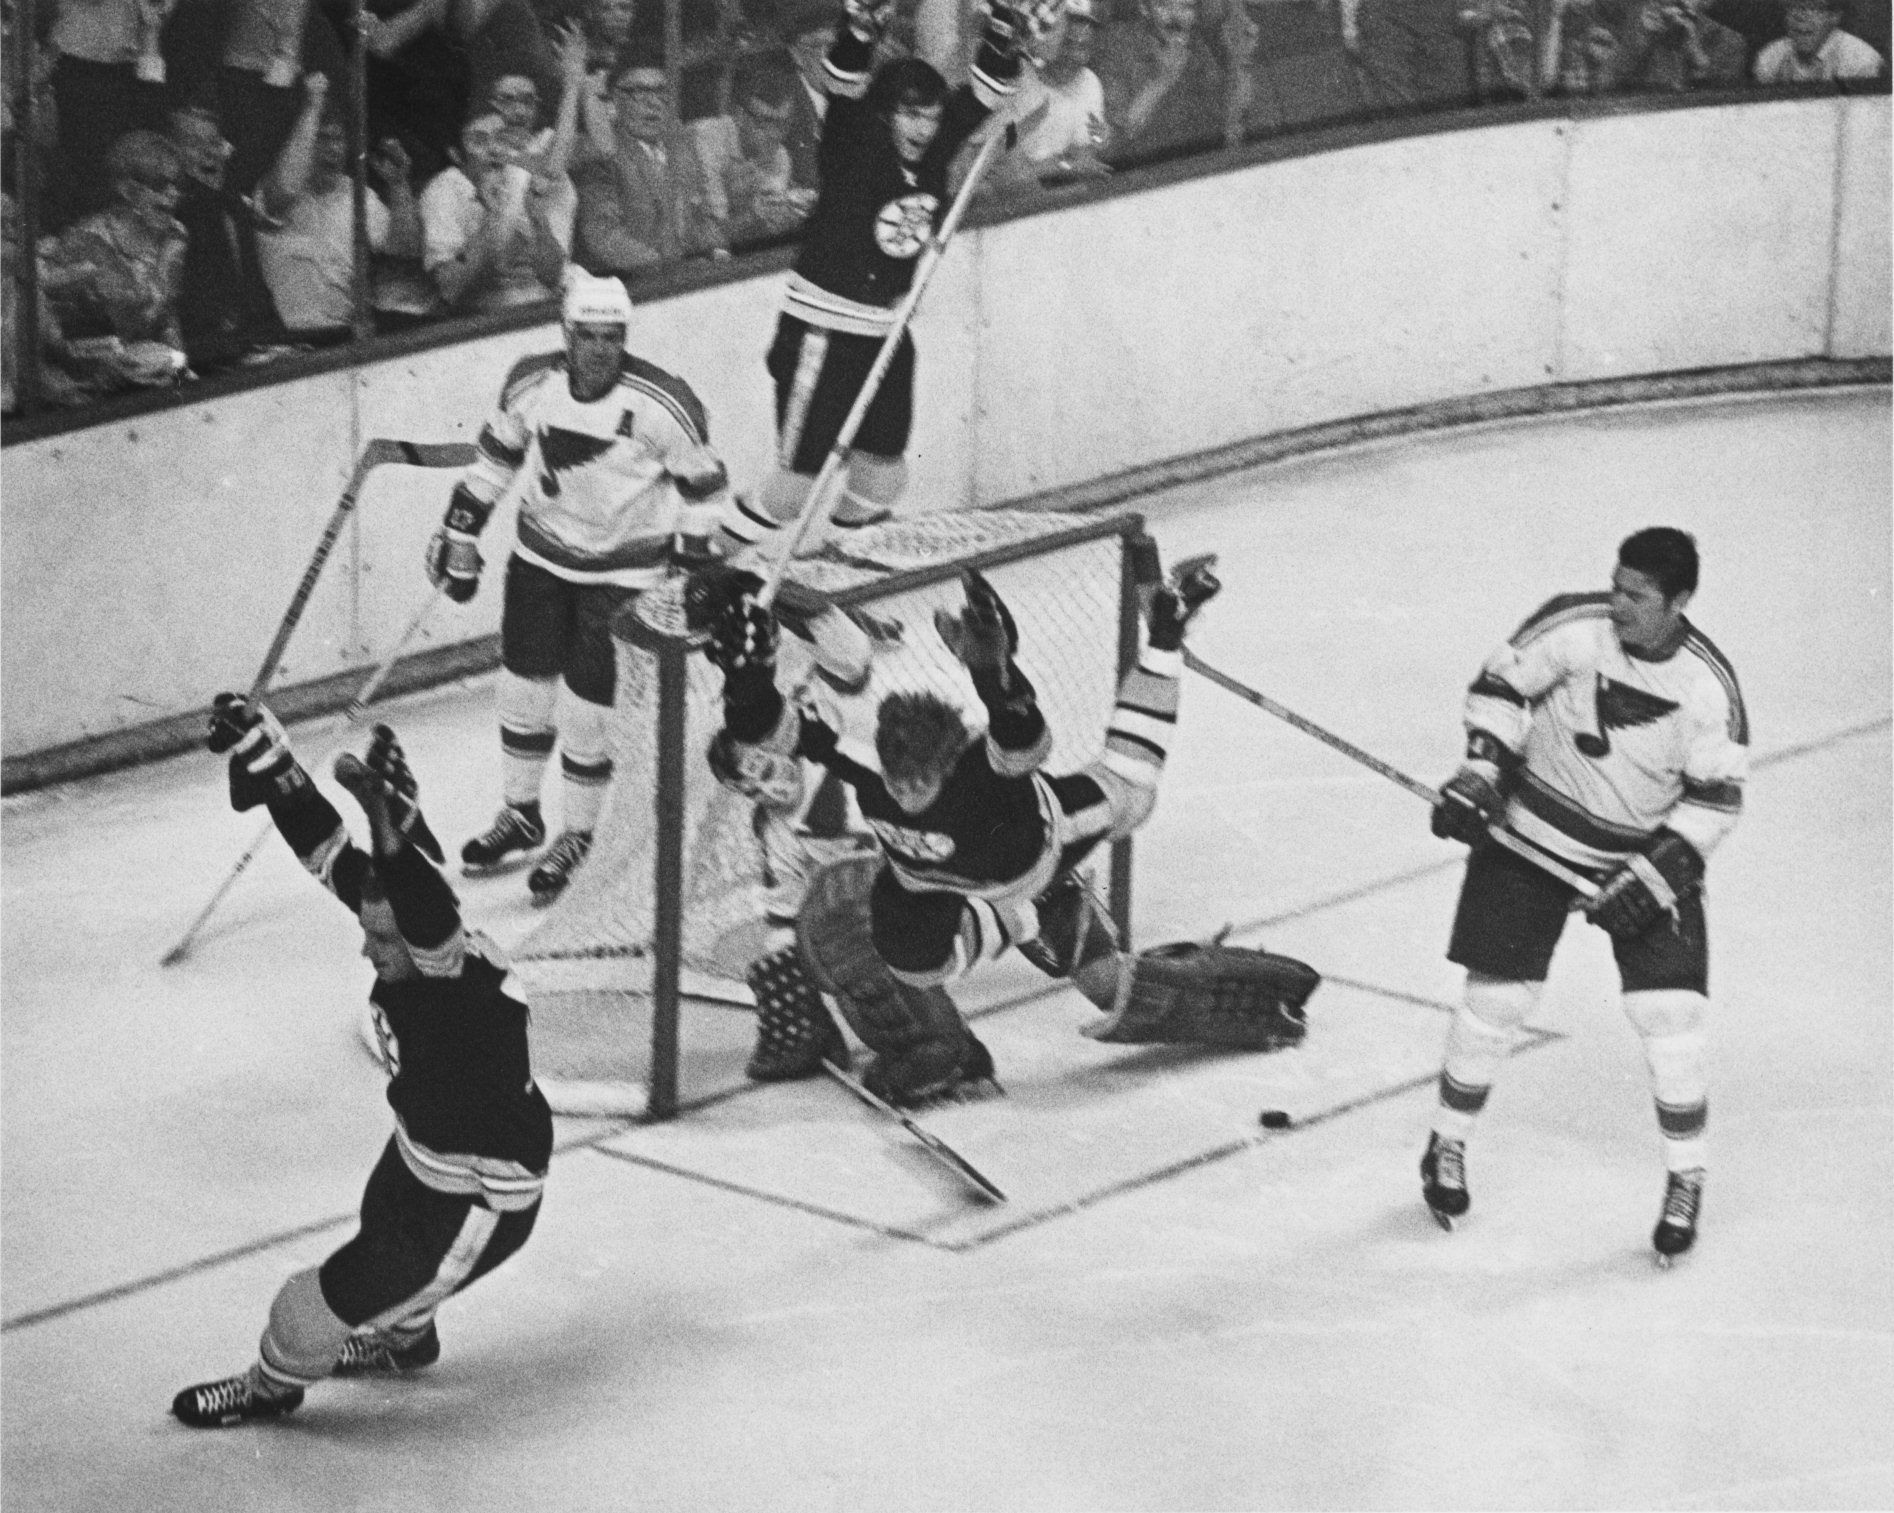 Remember When? Bobby Orr flies through air after winning Stanley Cup